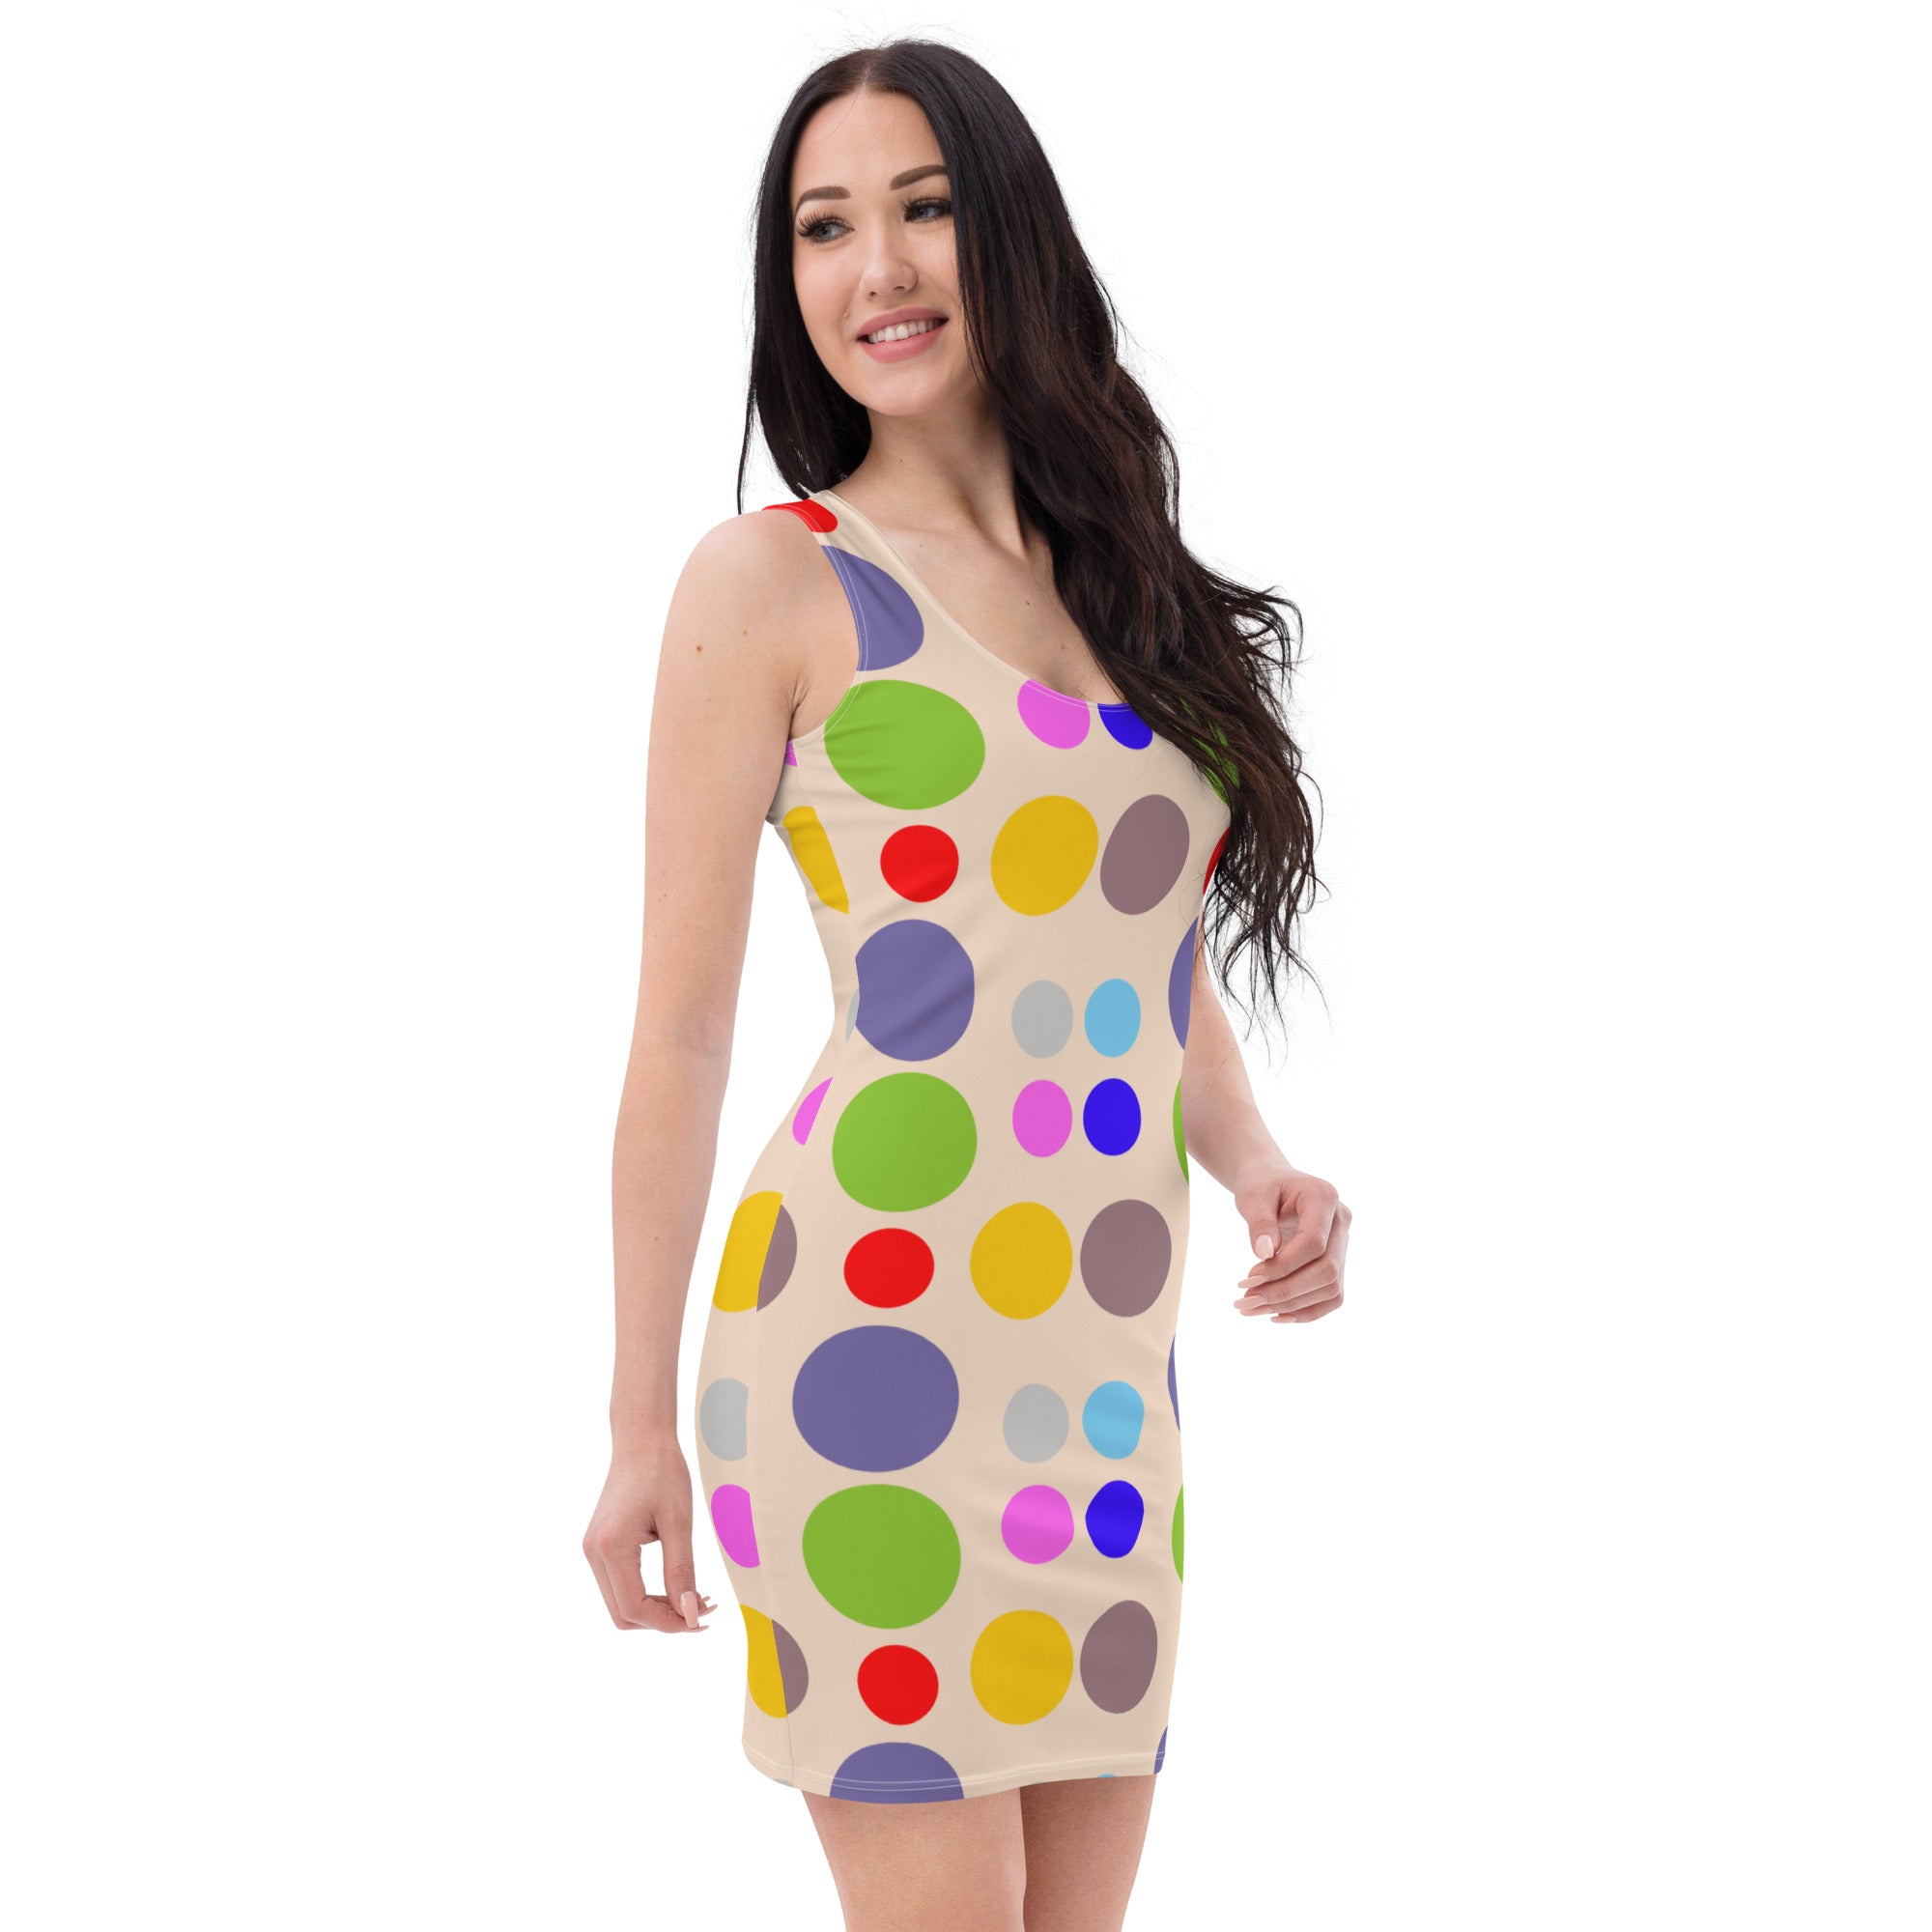 "Vintage Chic: Women’s Retro Polka Dots Fitted Dress" lioness-love